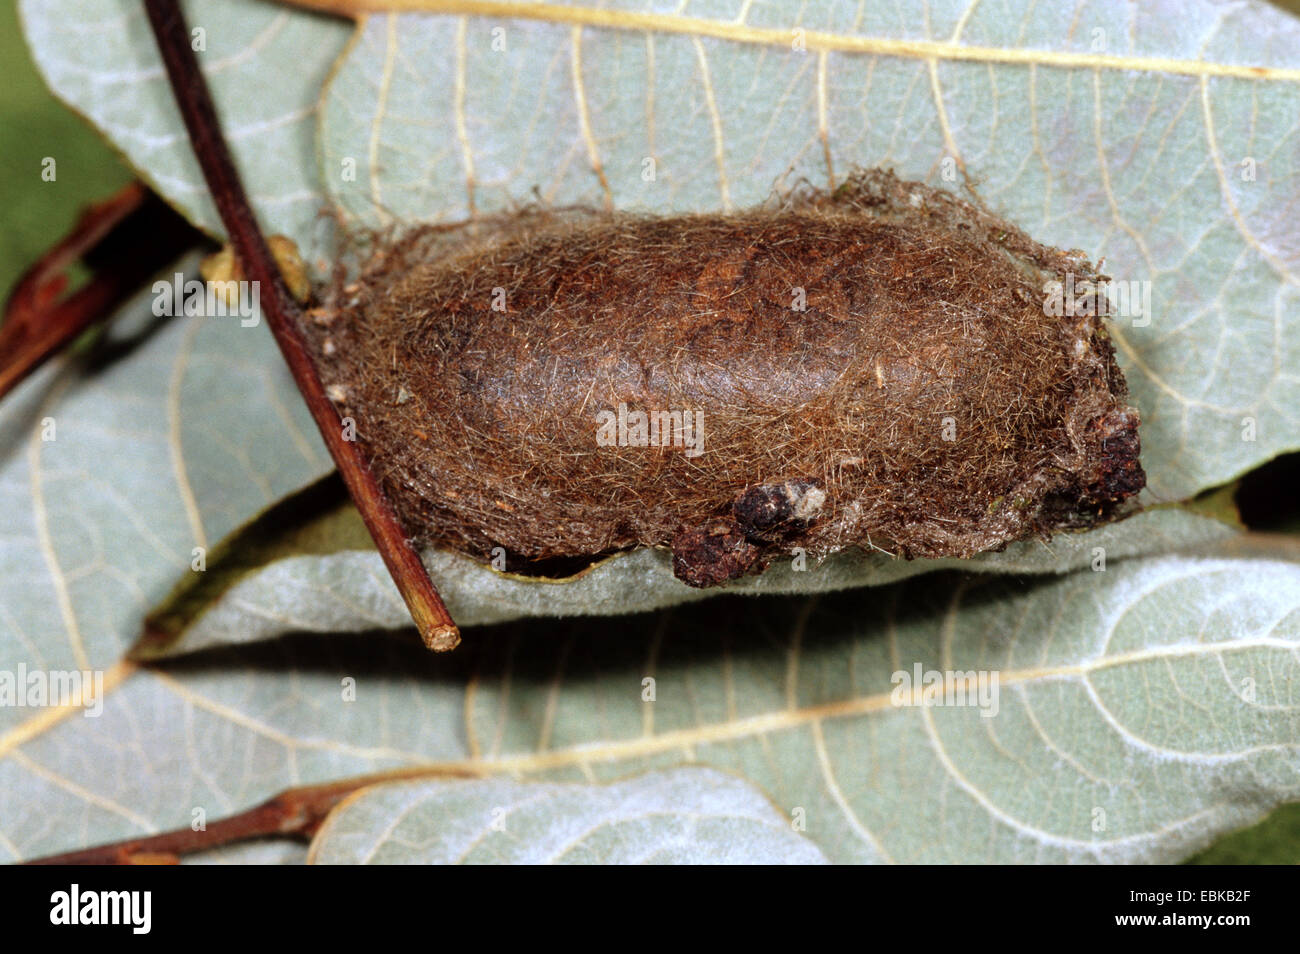 oak eggar (Lasiocampa quercus), Pupal stage, Germany Stock Photo